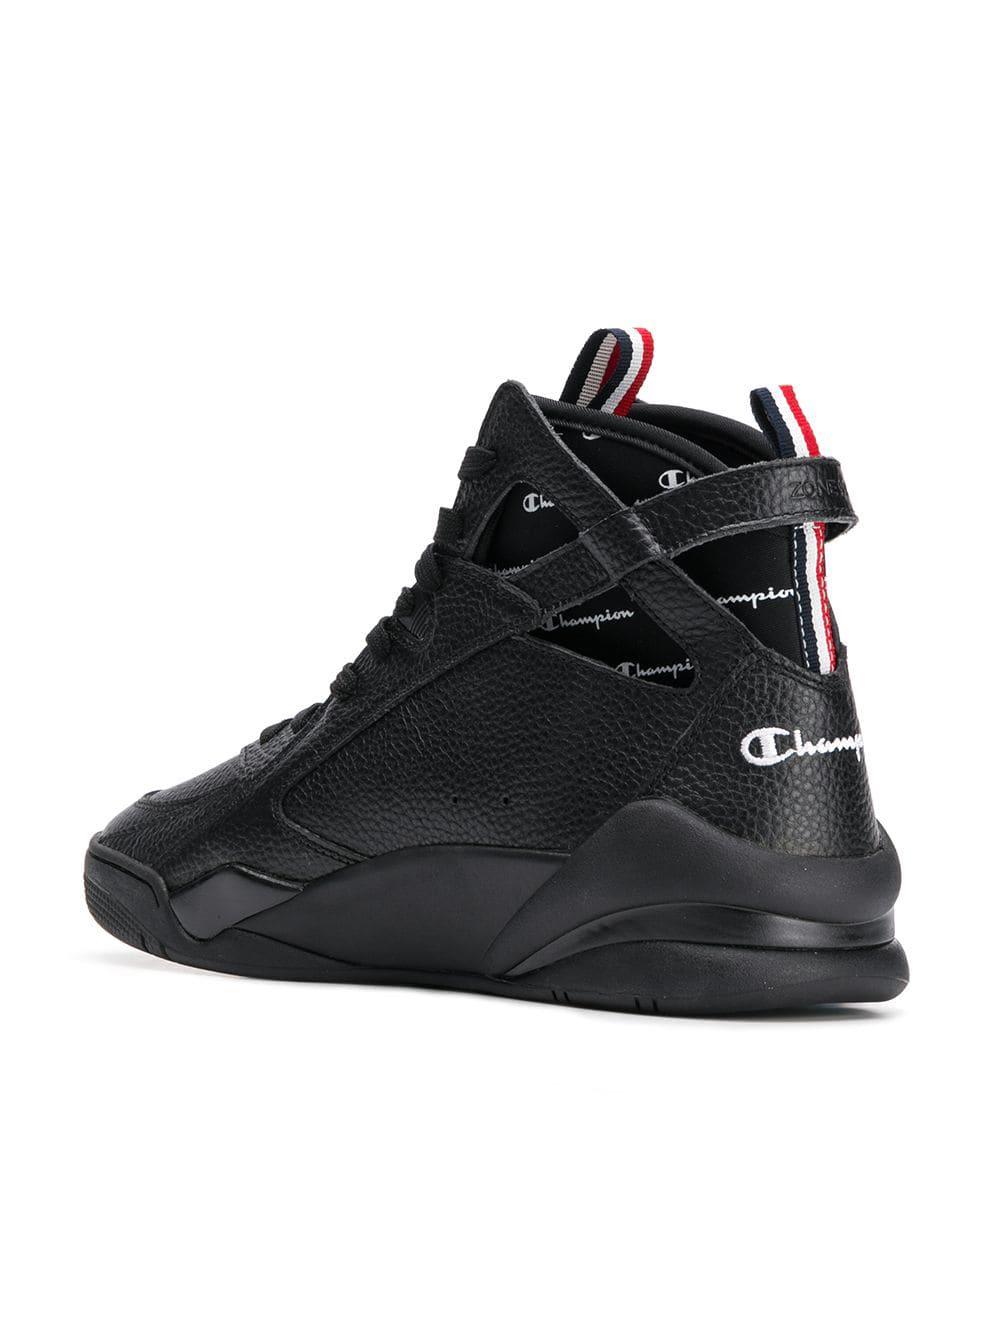 Champion Leather Hi-top Lace-up Sneakers in Black - Lyst